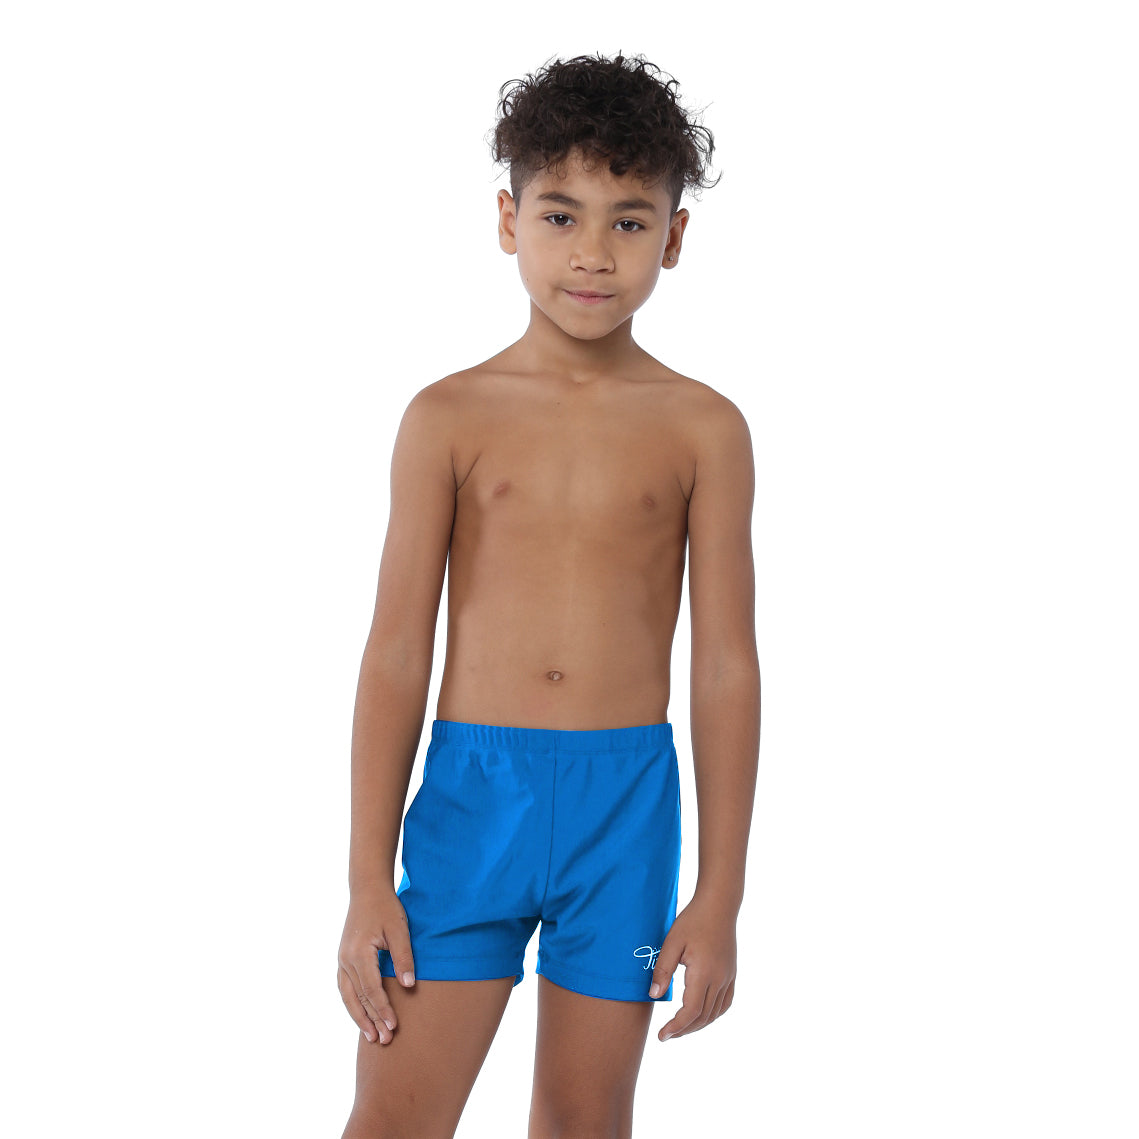 ESTAMICO Swim Briefs Boys Quick Dry Swimsuits Youth Athletic Swimwear Jammers